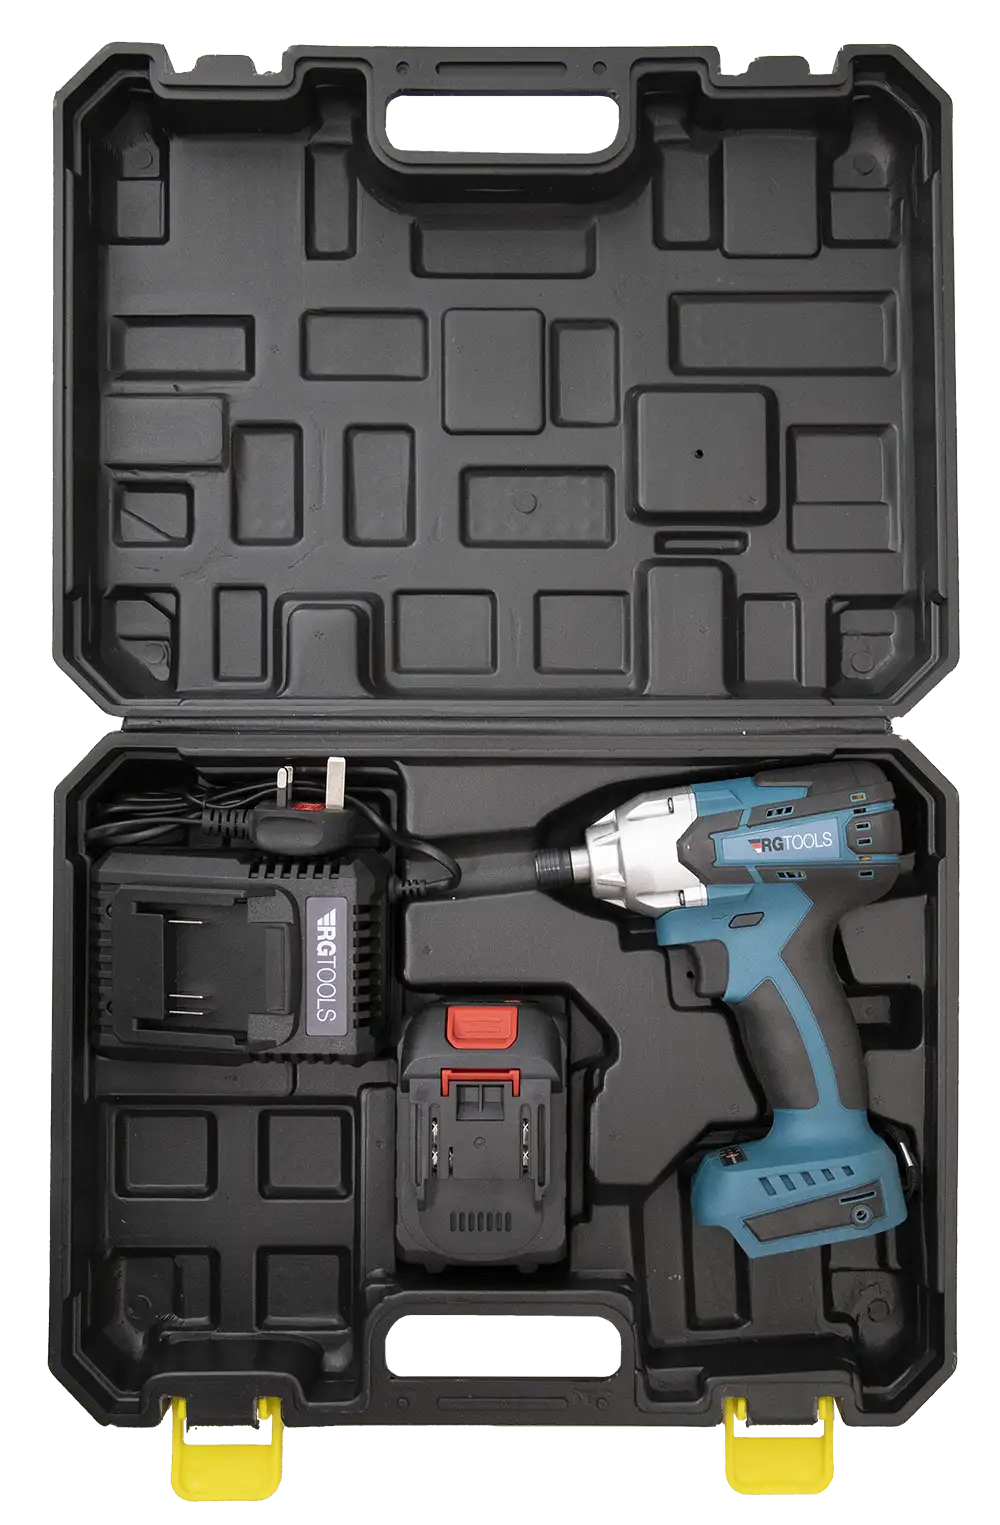 RG Tools RG10020 wrench, battery and charger in the opened case